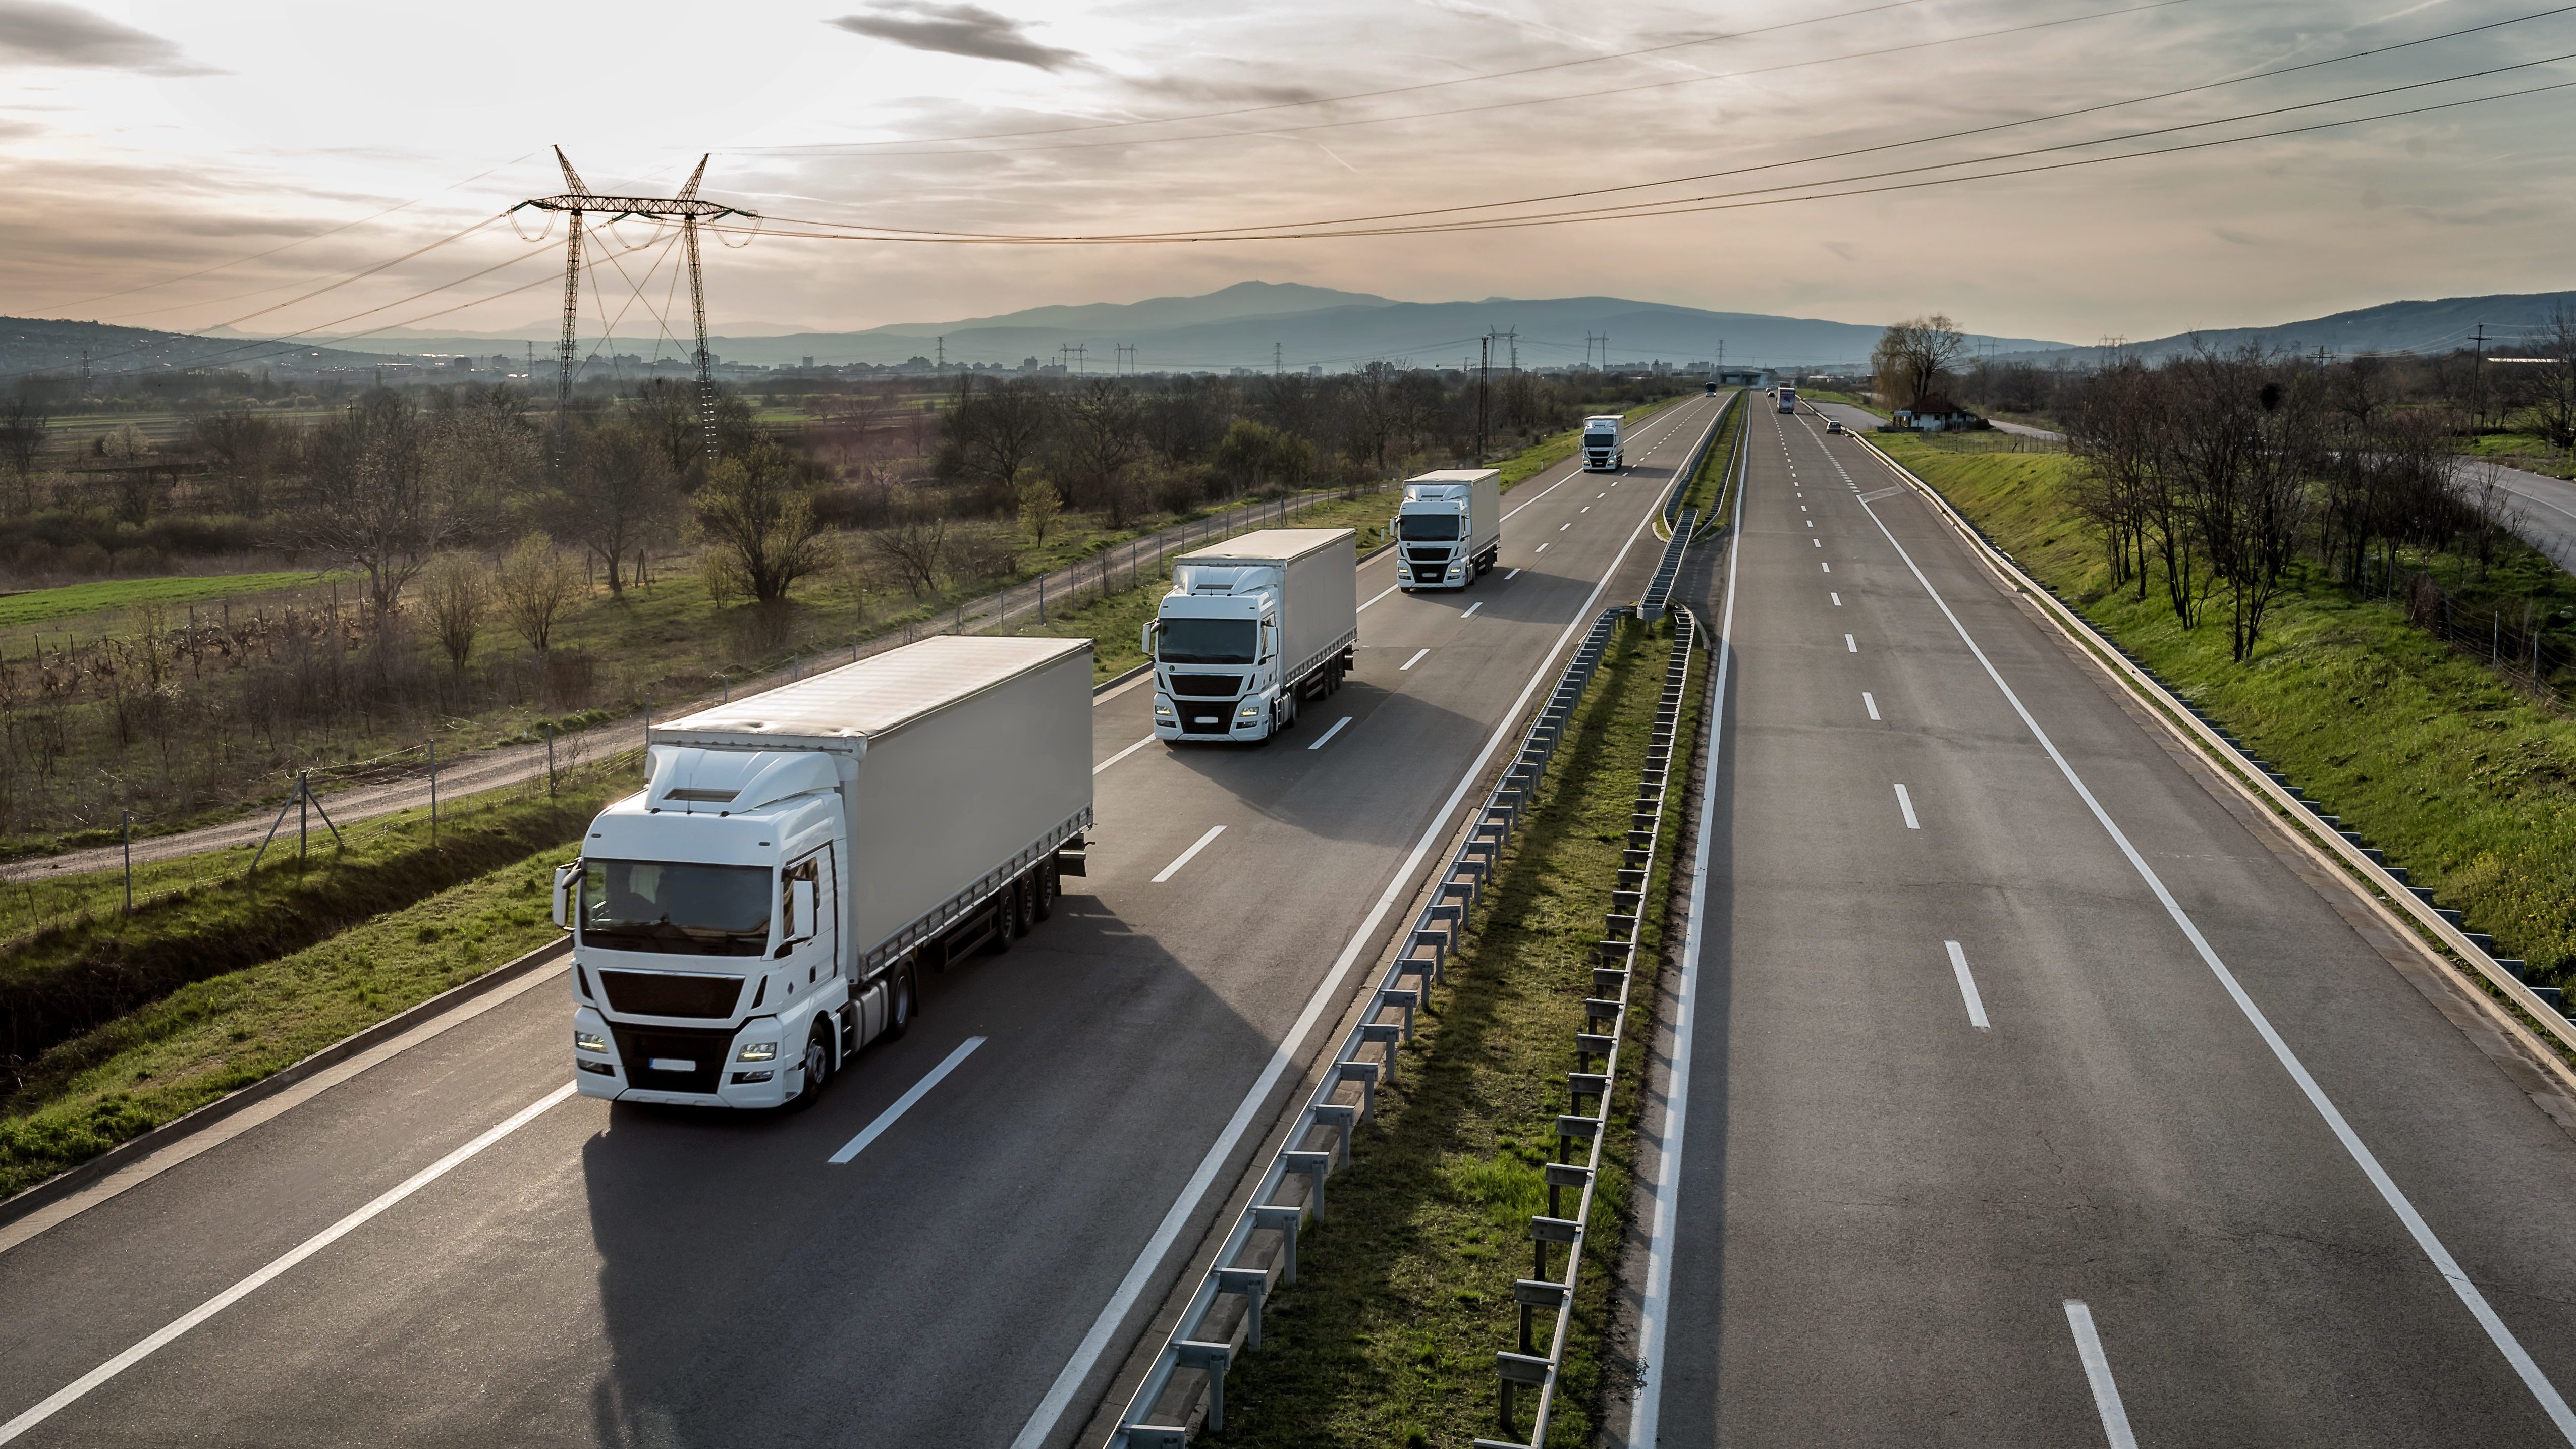 Germans would increasingly feel safer with autonomous self-driving trucks on the road - Bosch Media Service